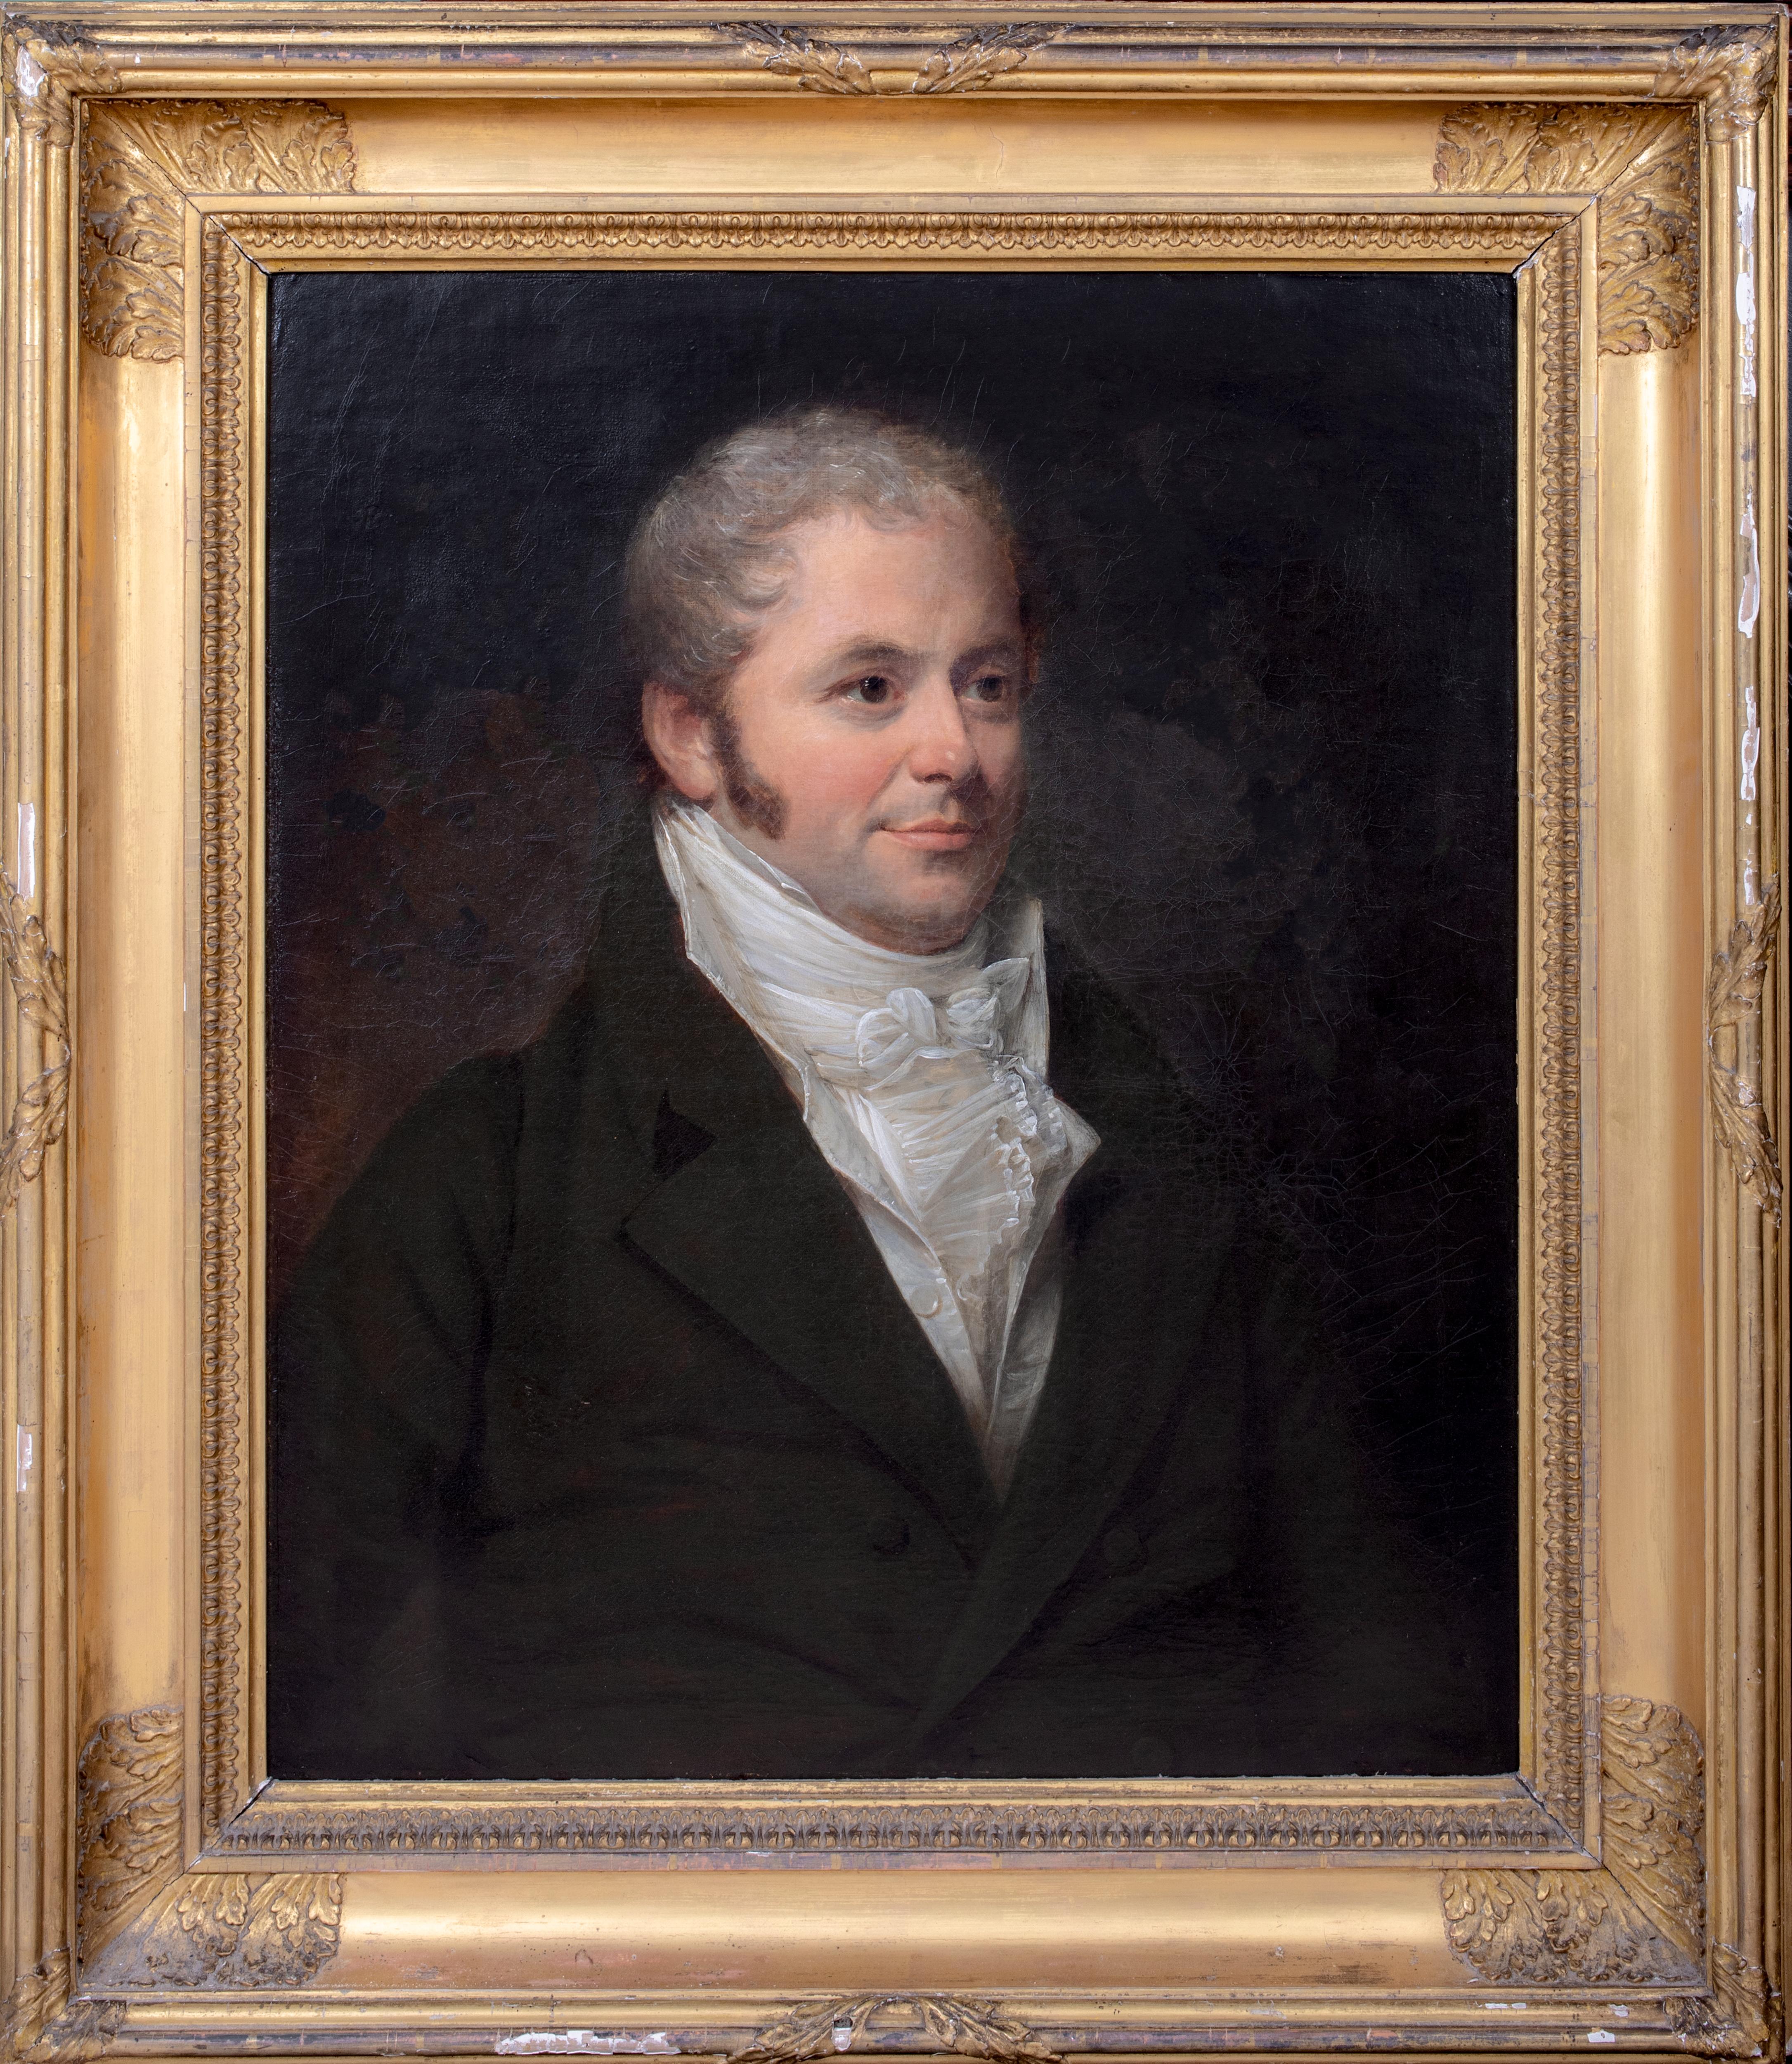 Portrait of Emmanuel Muller, circa 1805

attributed to Sir William Beechey (1753-1859)

Large early 19th Century Georgian portrait of Emmanuel Muller of Ongar, Essex, oil on canvas. Excellent quality and condition circa 1805 portrait of Muller in